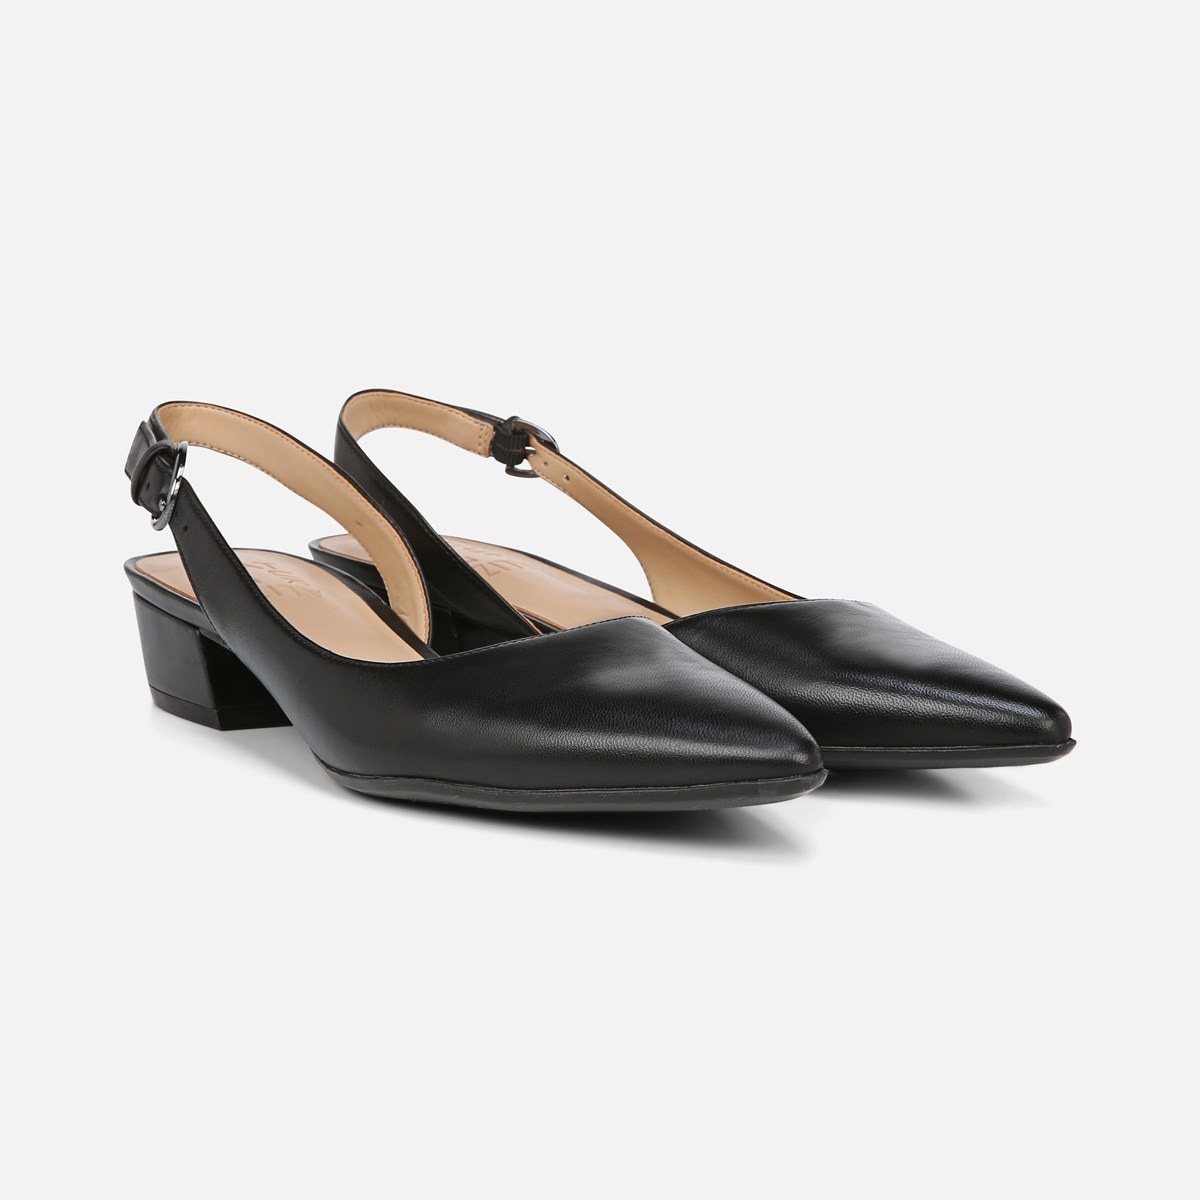 naturalizer black leather shoes